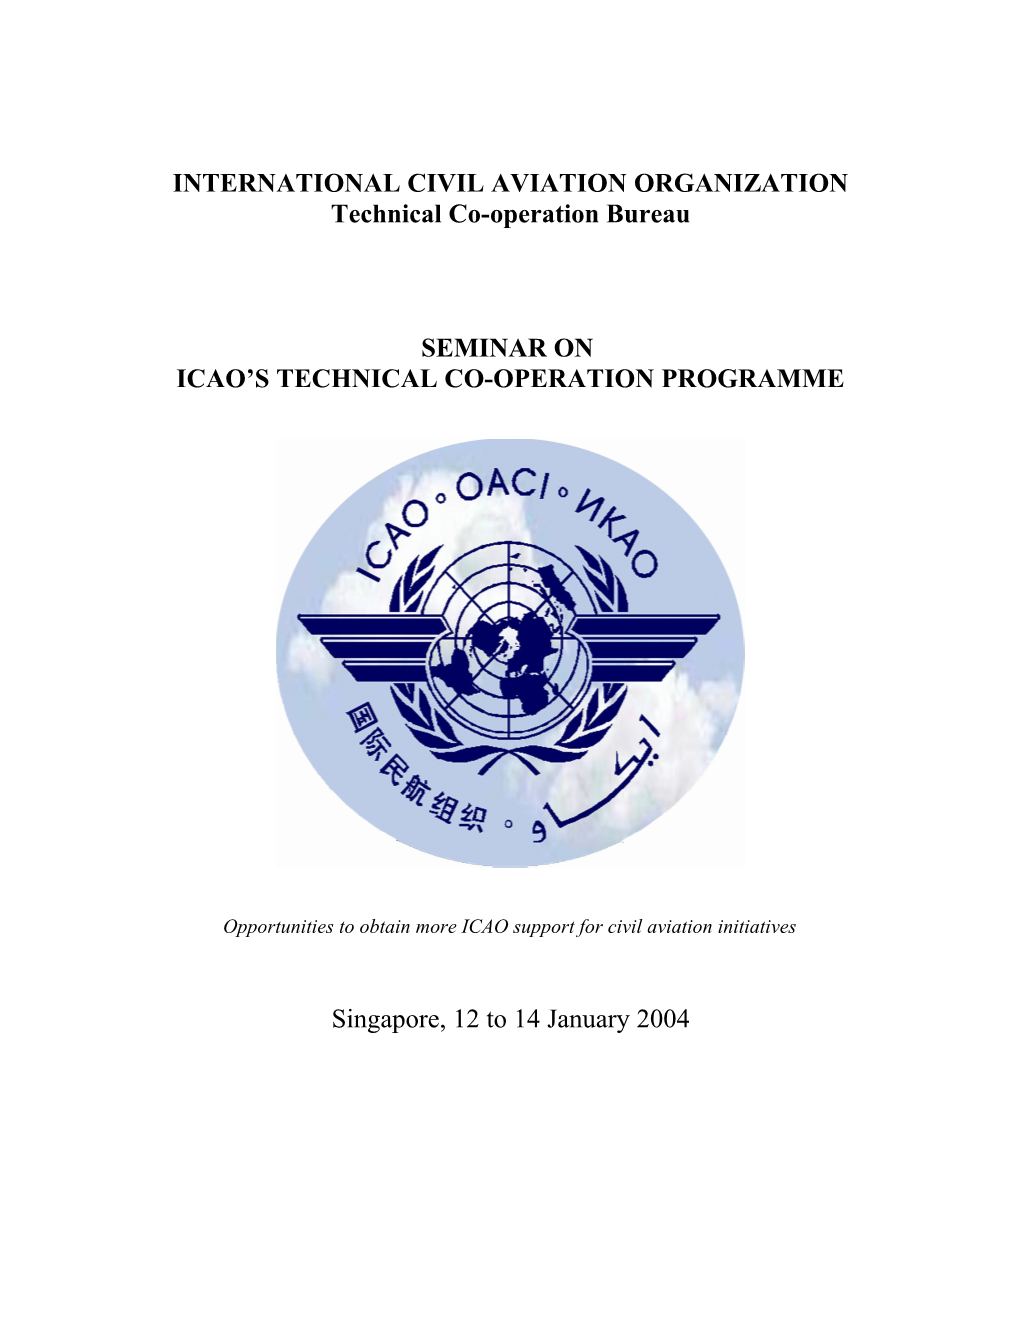 Seminar on ICAO's Technical Co-Operation Programme